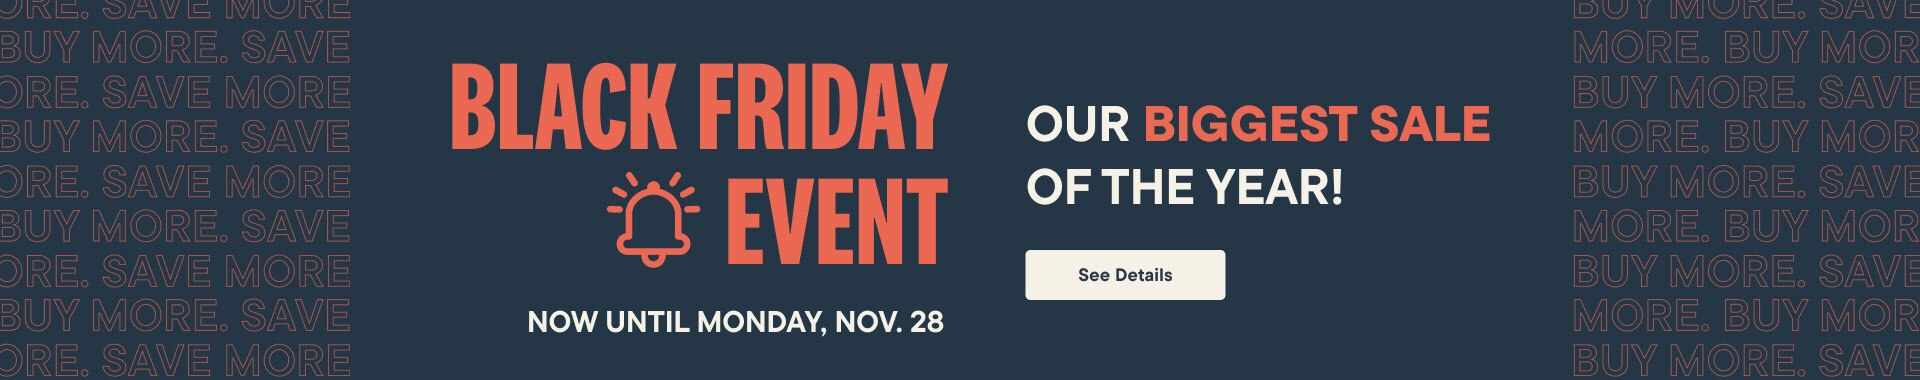 Black Friday Event Now until Monday, Nov 28. Save on EVERYTHING!* See Details.